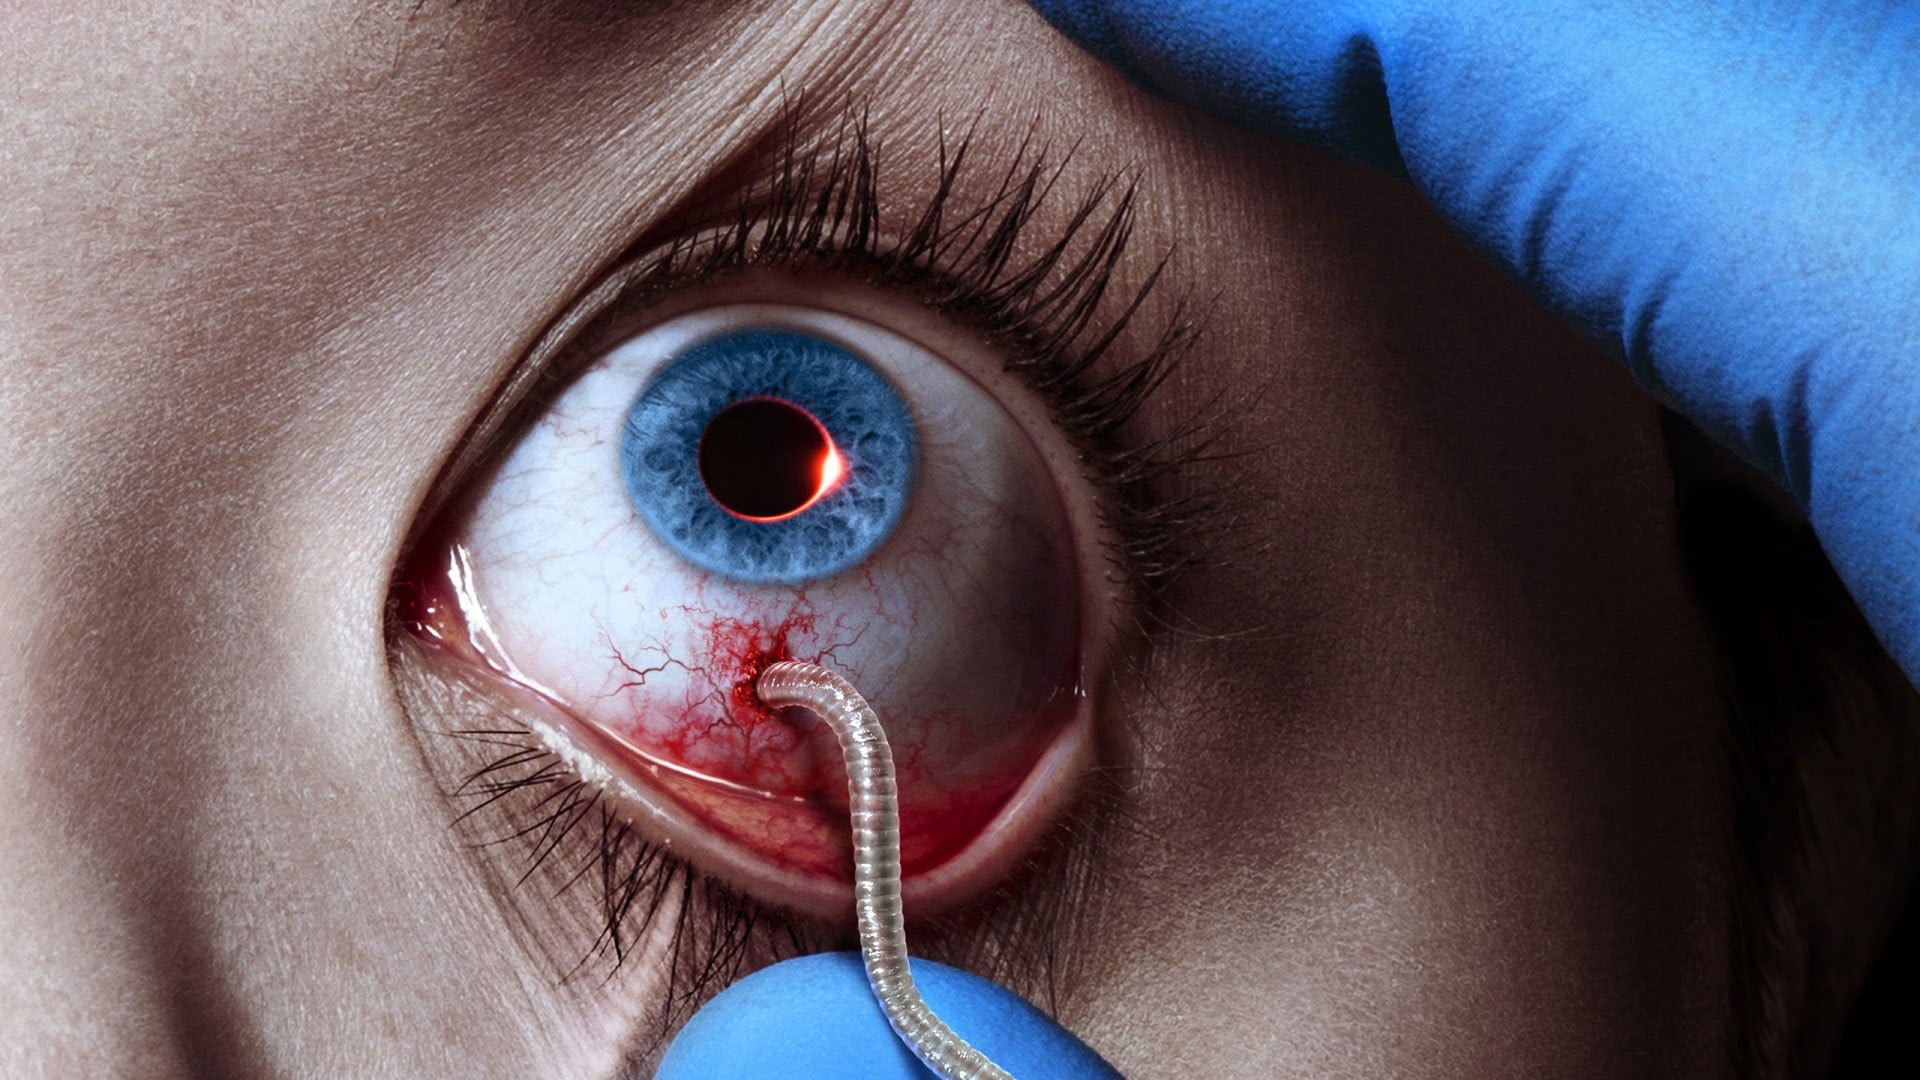 Backdrop Image for The Strain